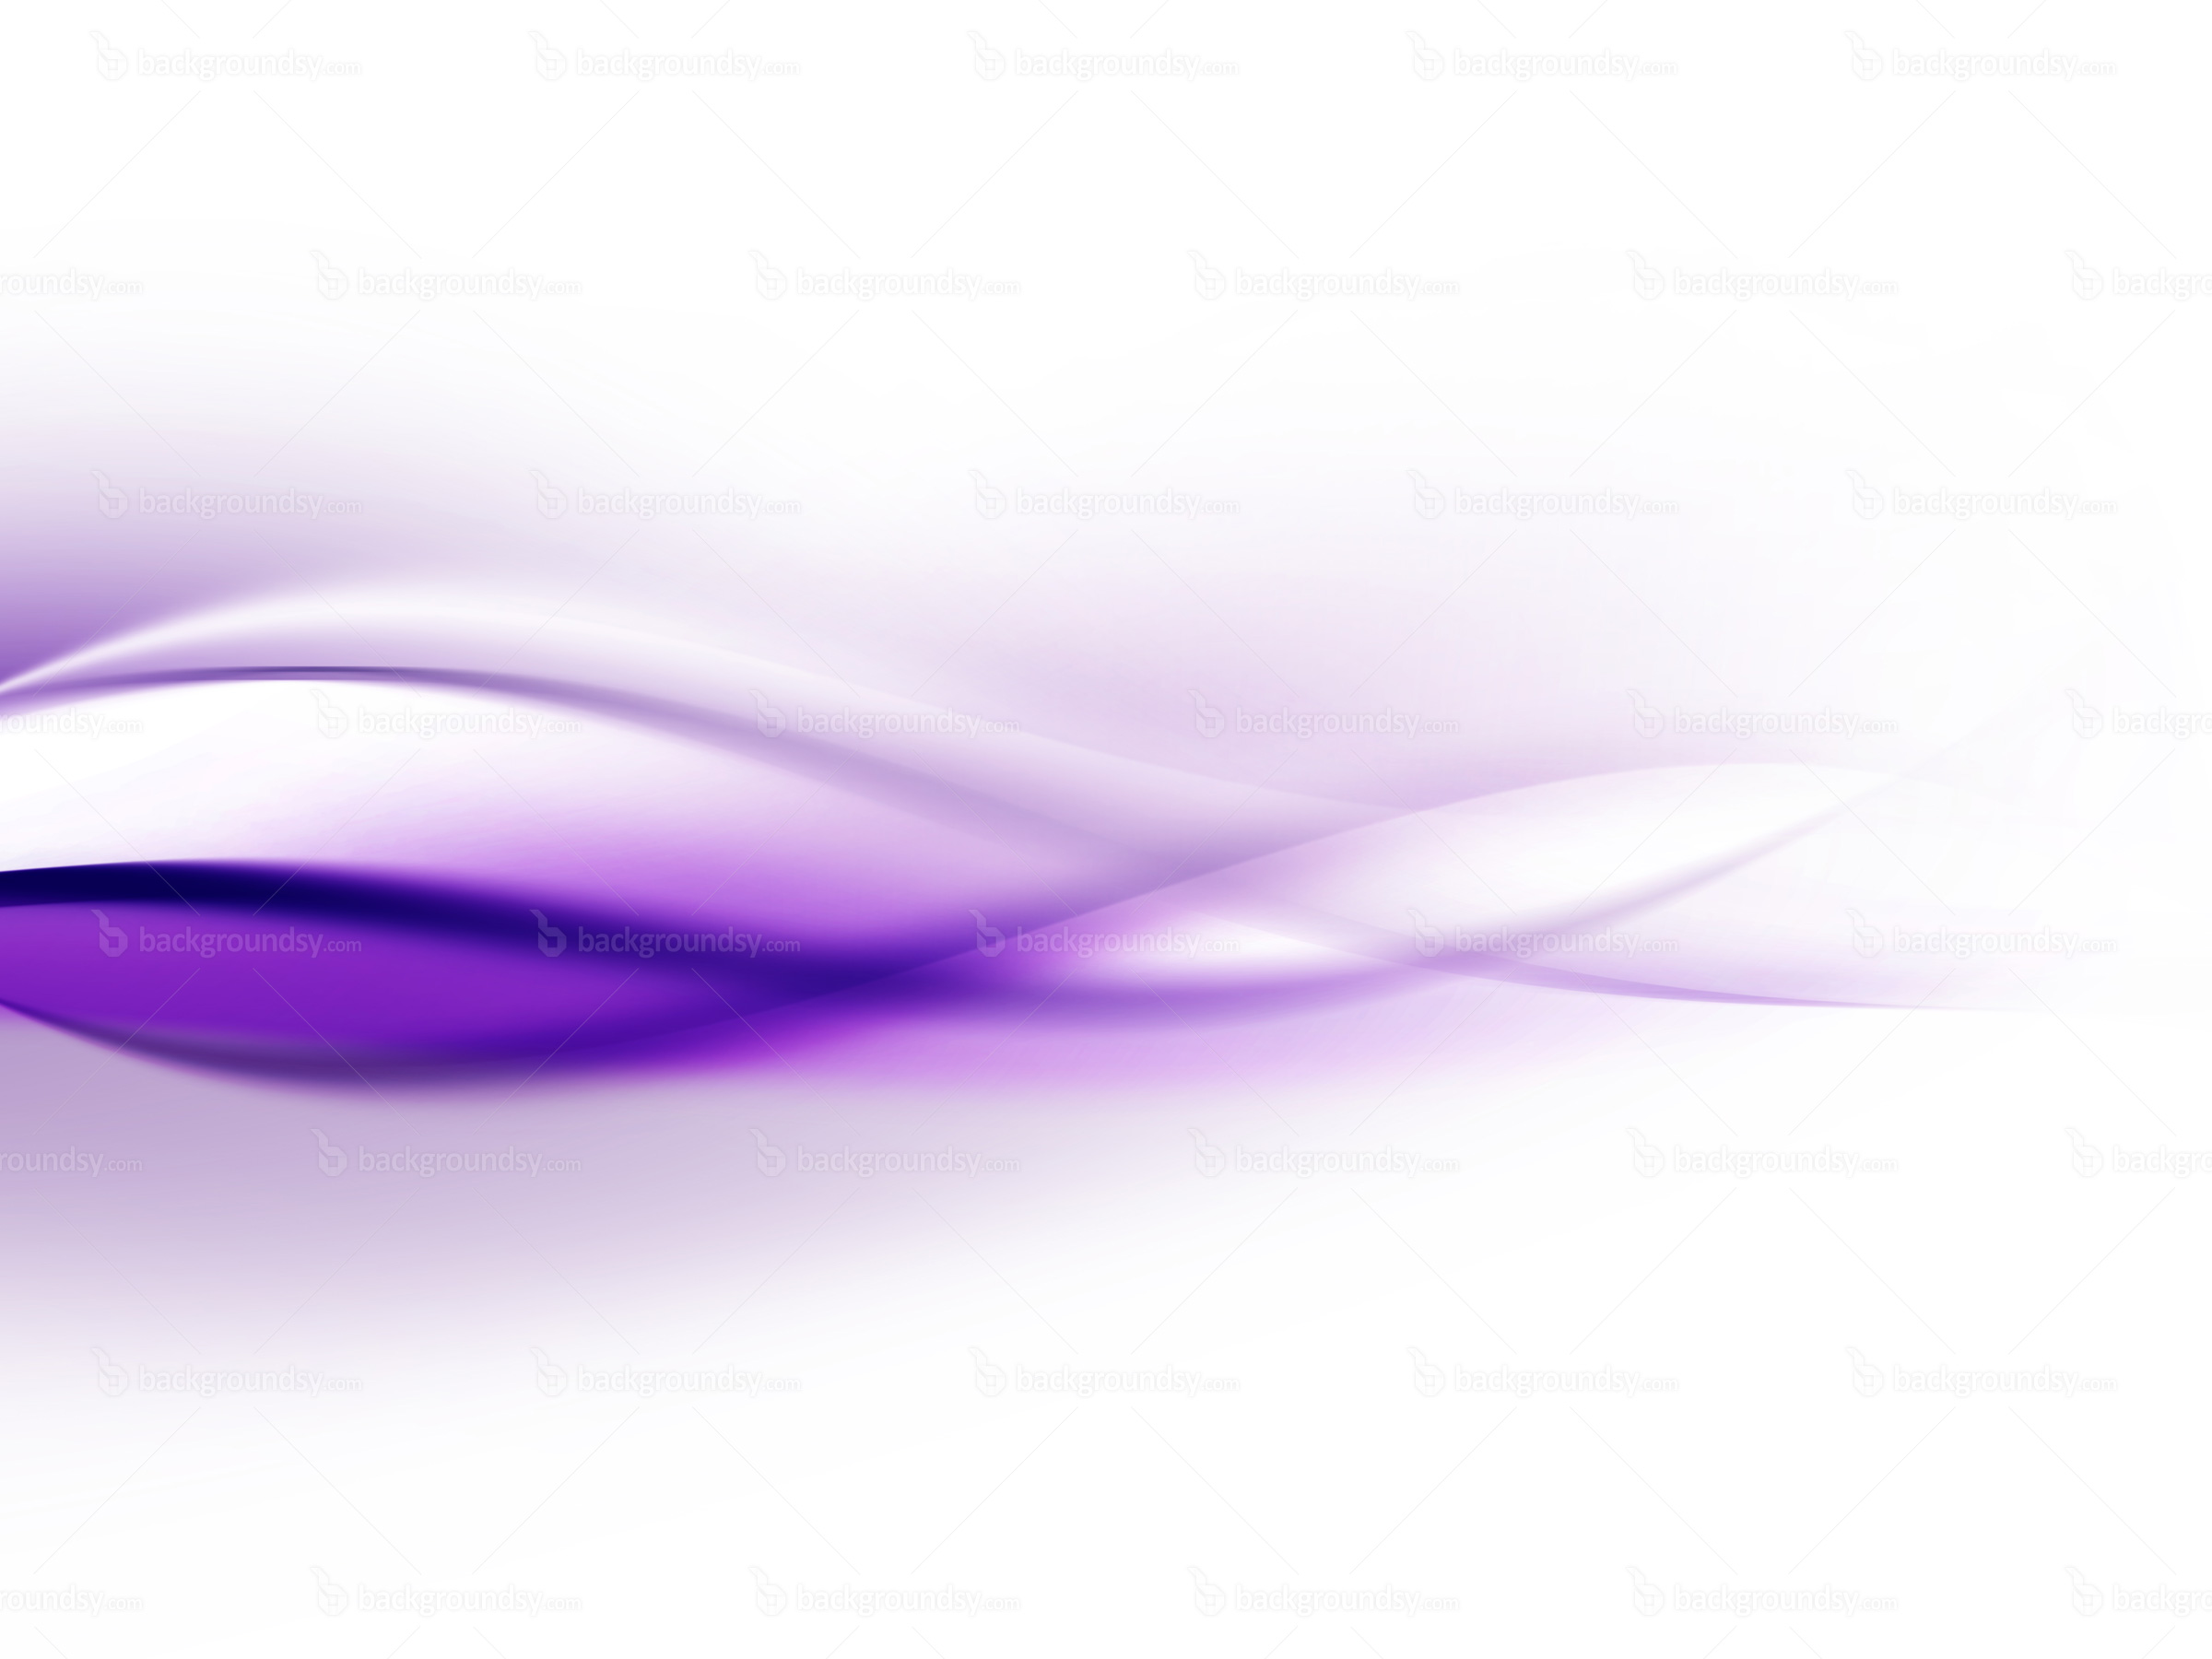 Abstract Purple Waves Wallpapers